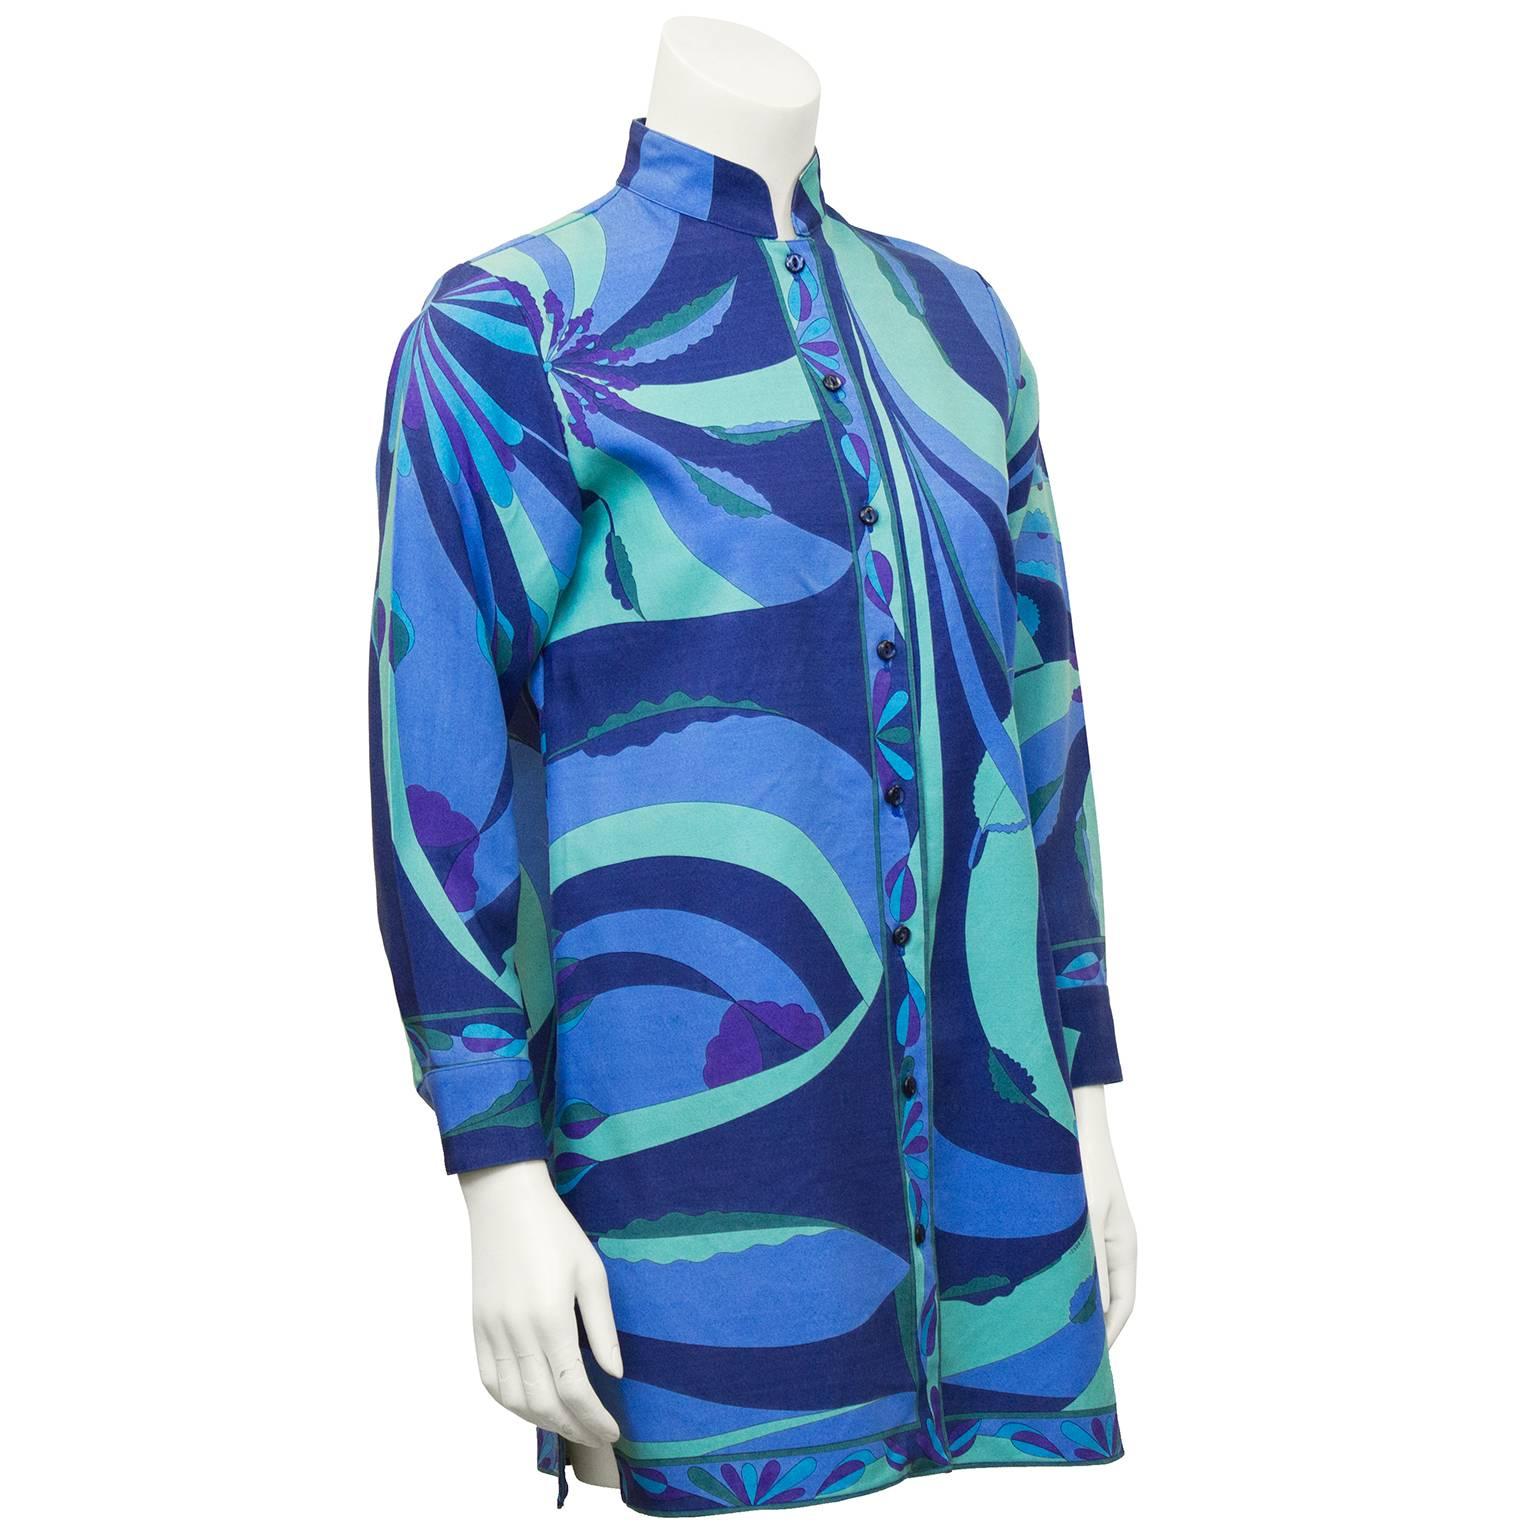 Great 2000's label revival  of Italian design house Alverado Bessi.  Silk & wool blend long A-line top, printed in shades of blue, green and purple. Matching midnight blue buttons and a Mandarin collar. Excellent condition, US 8. Perfect over